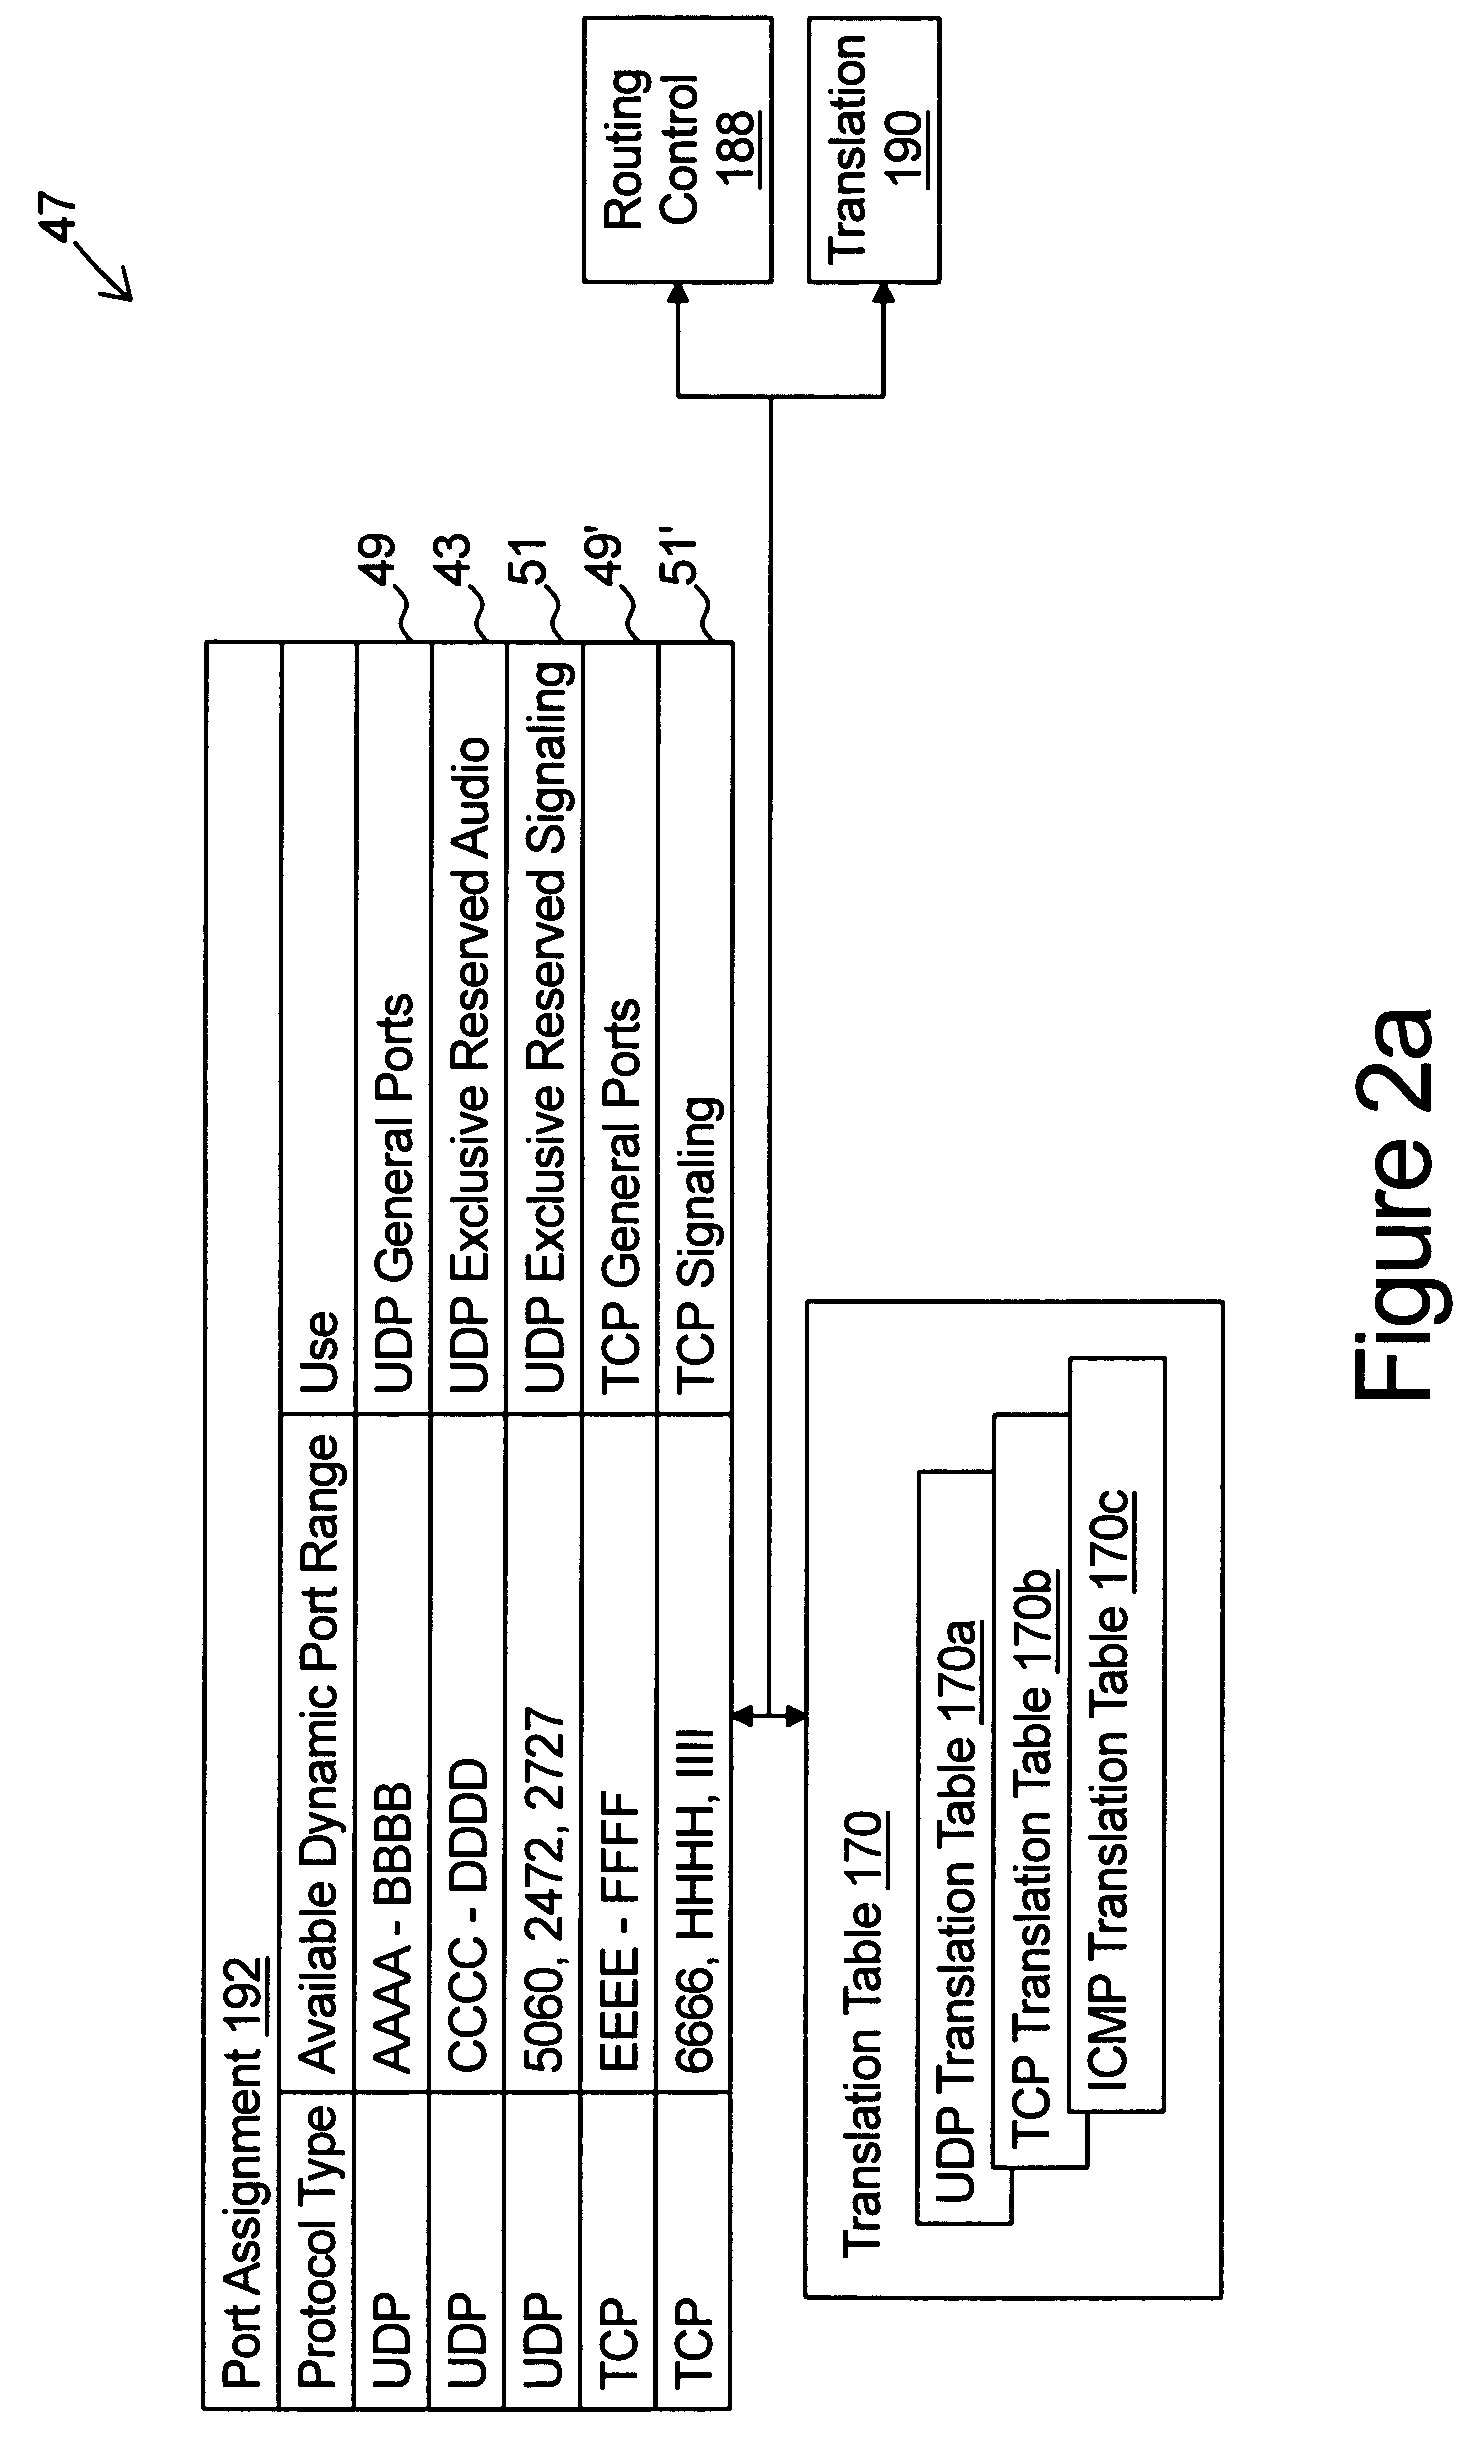 Stand alone multi-media terminal adapter with network address translation and port partitioning